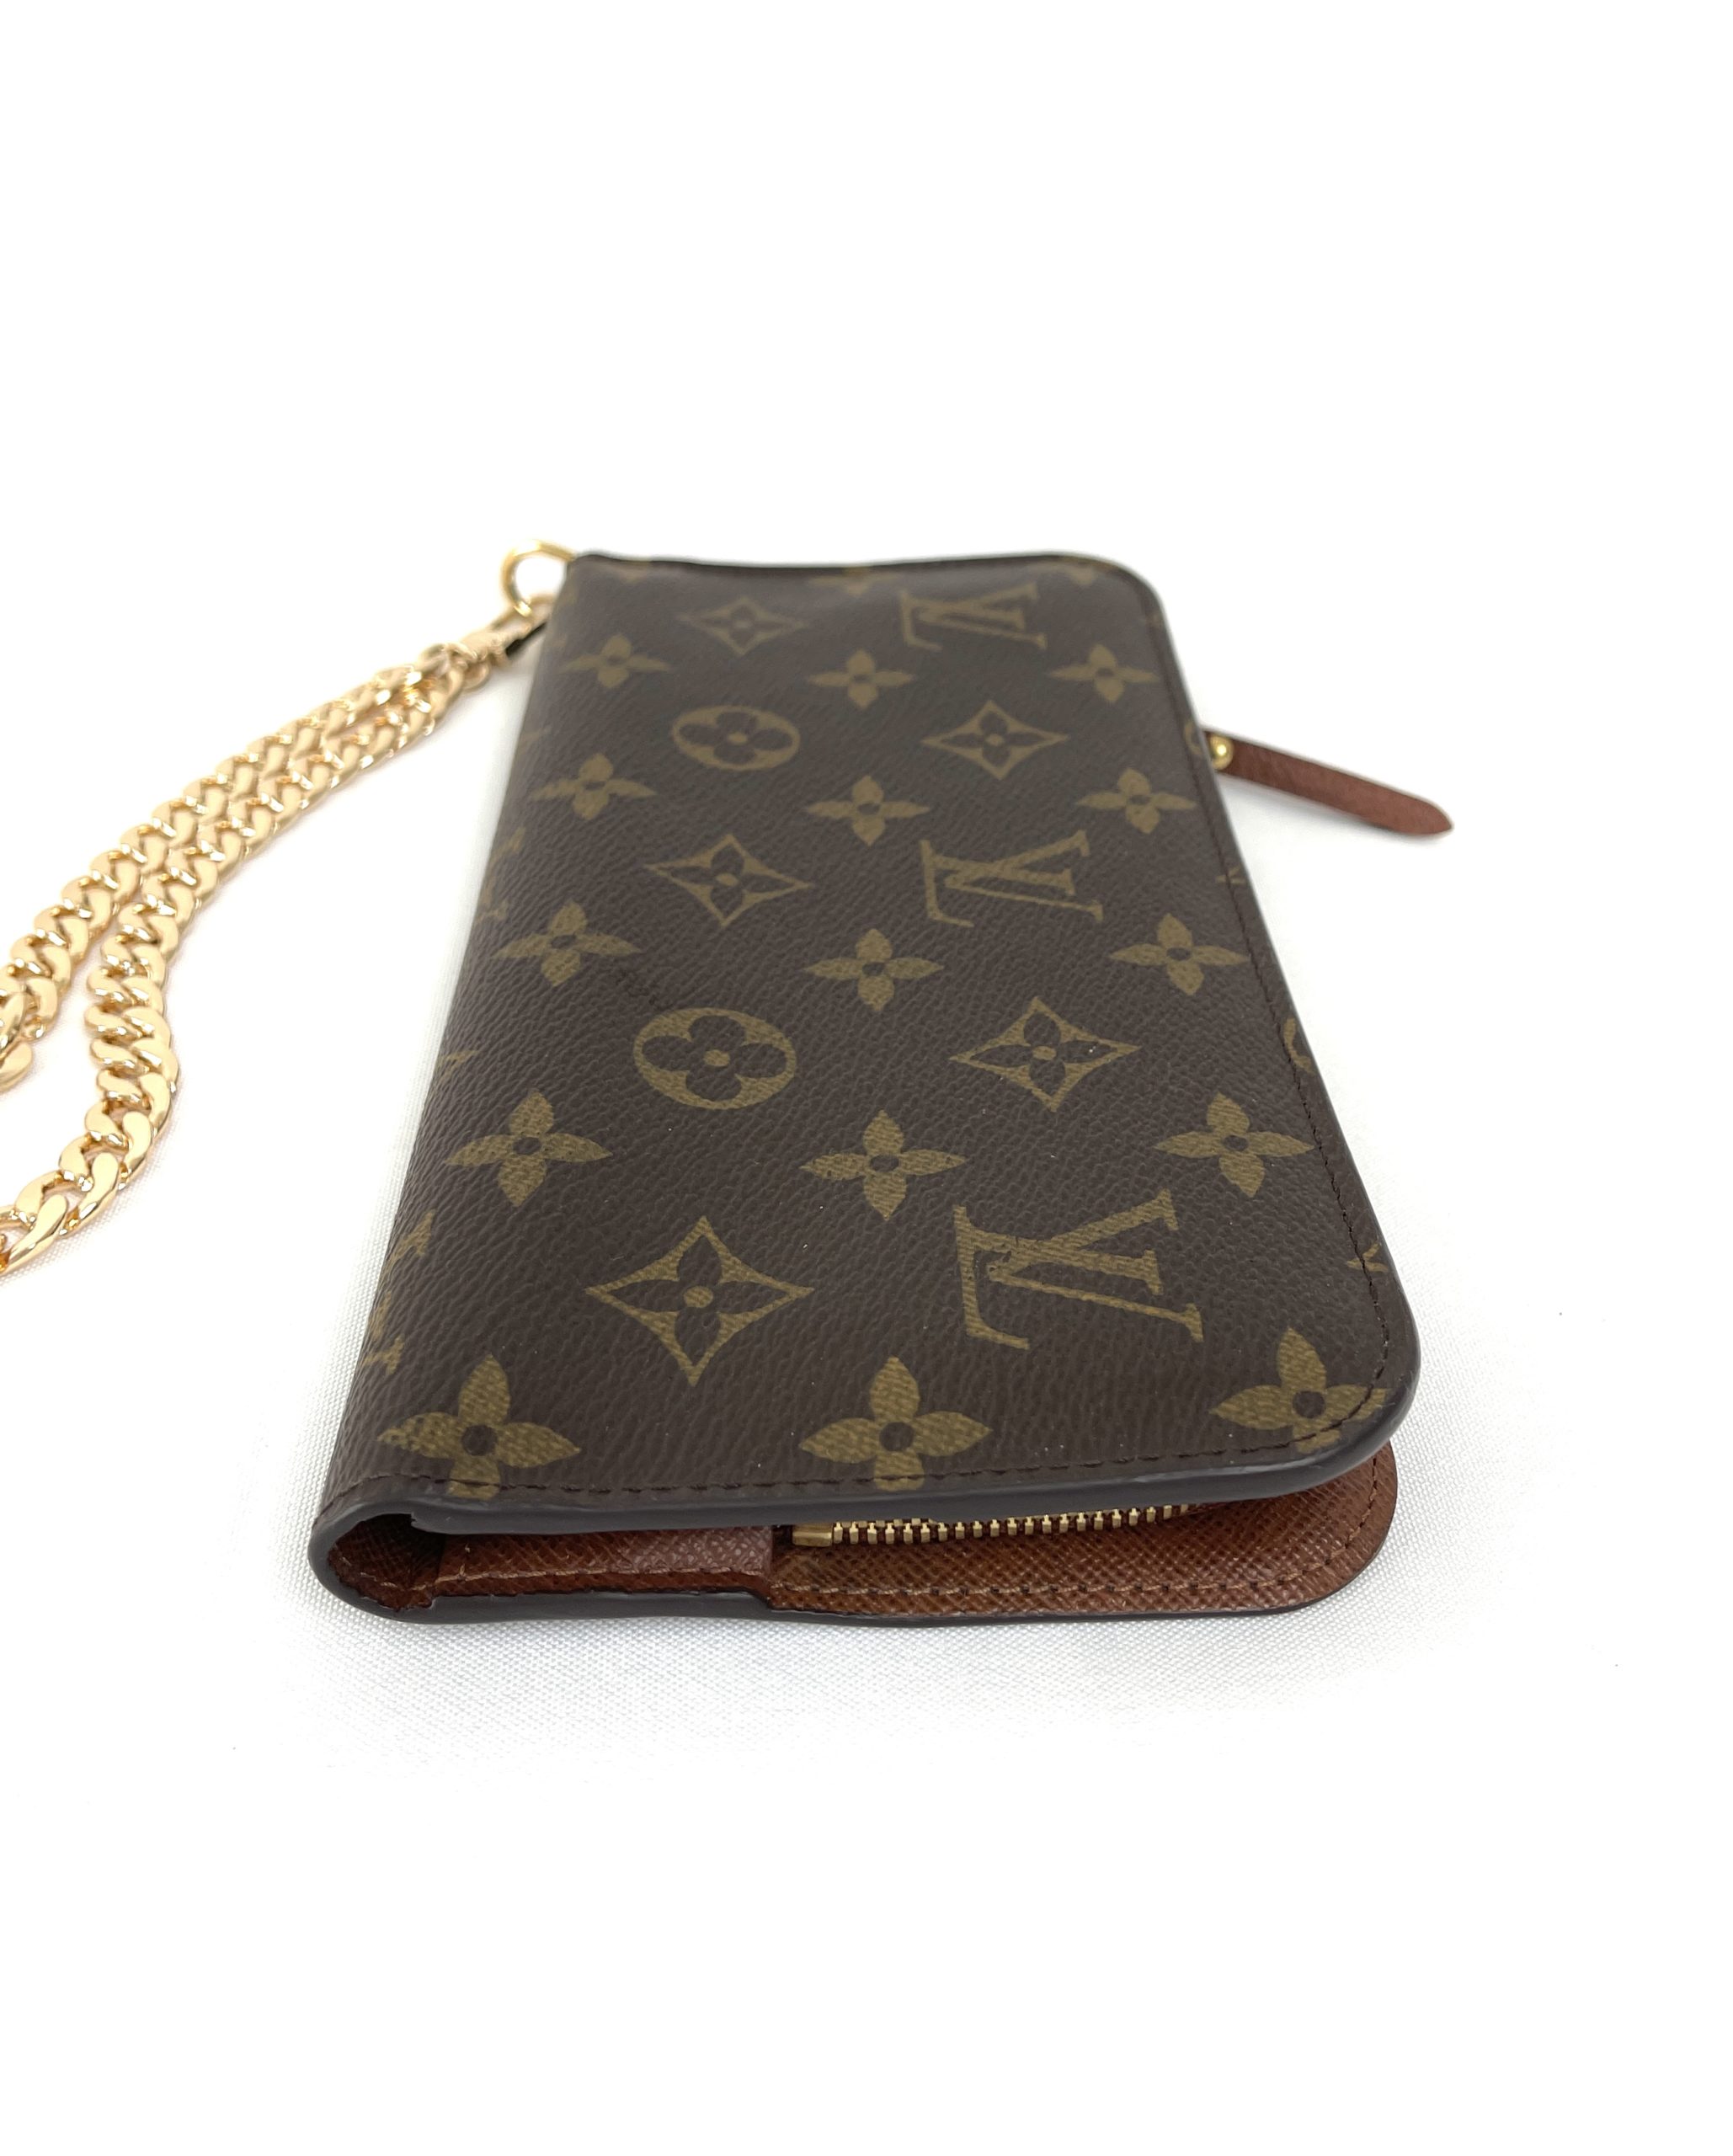 I kove the Louis Vuitton Insolite wallet. It has 12 credit card slots